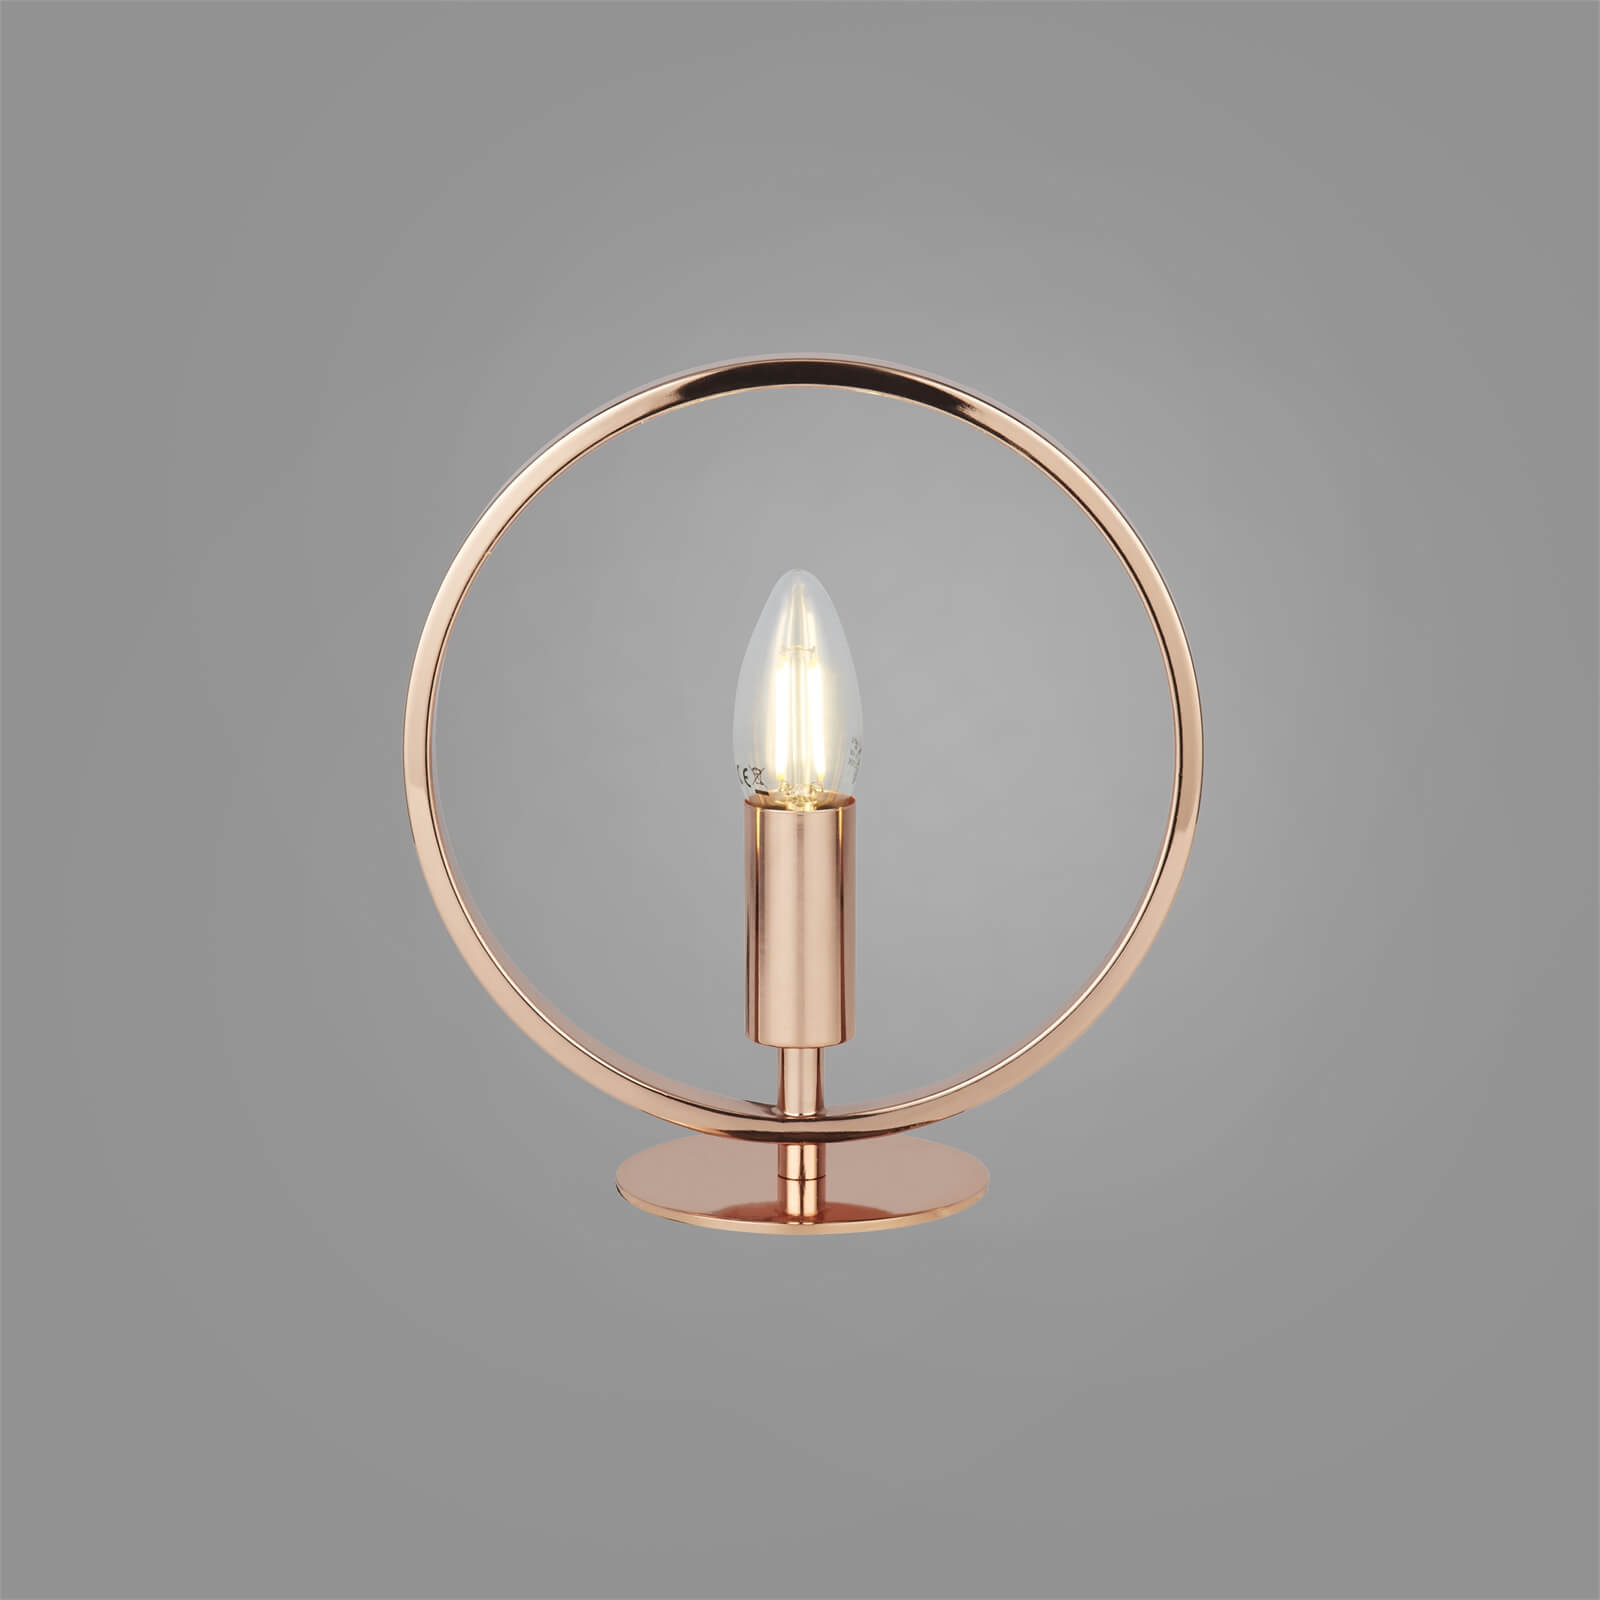 Durras Ring Detail Table Lamp - Rose Gold